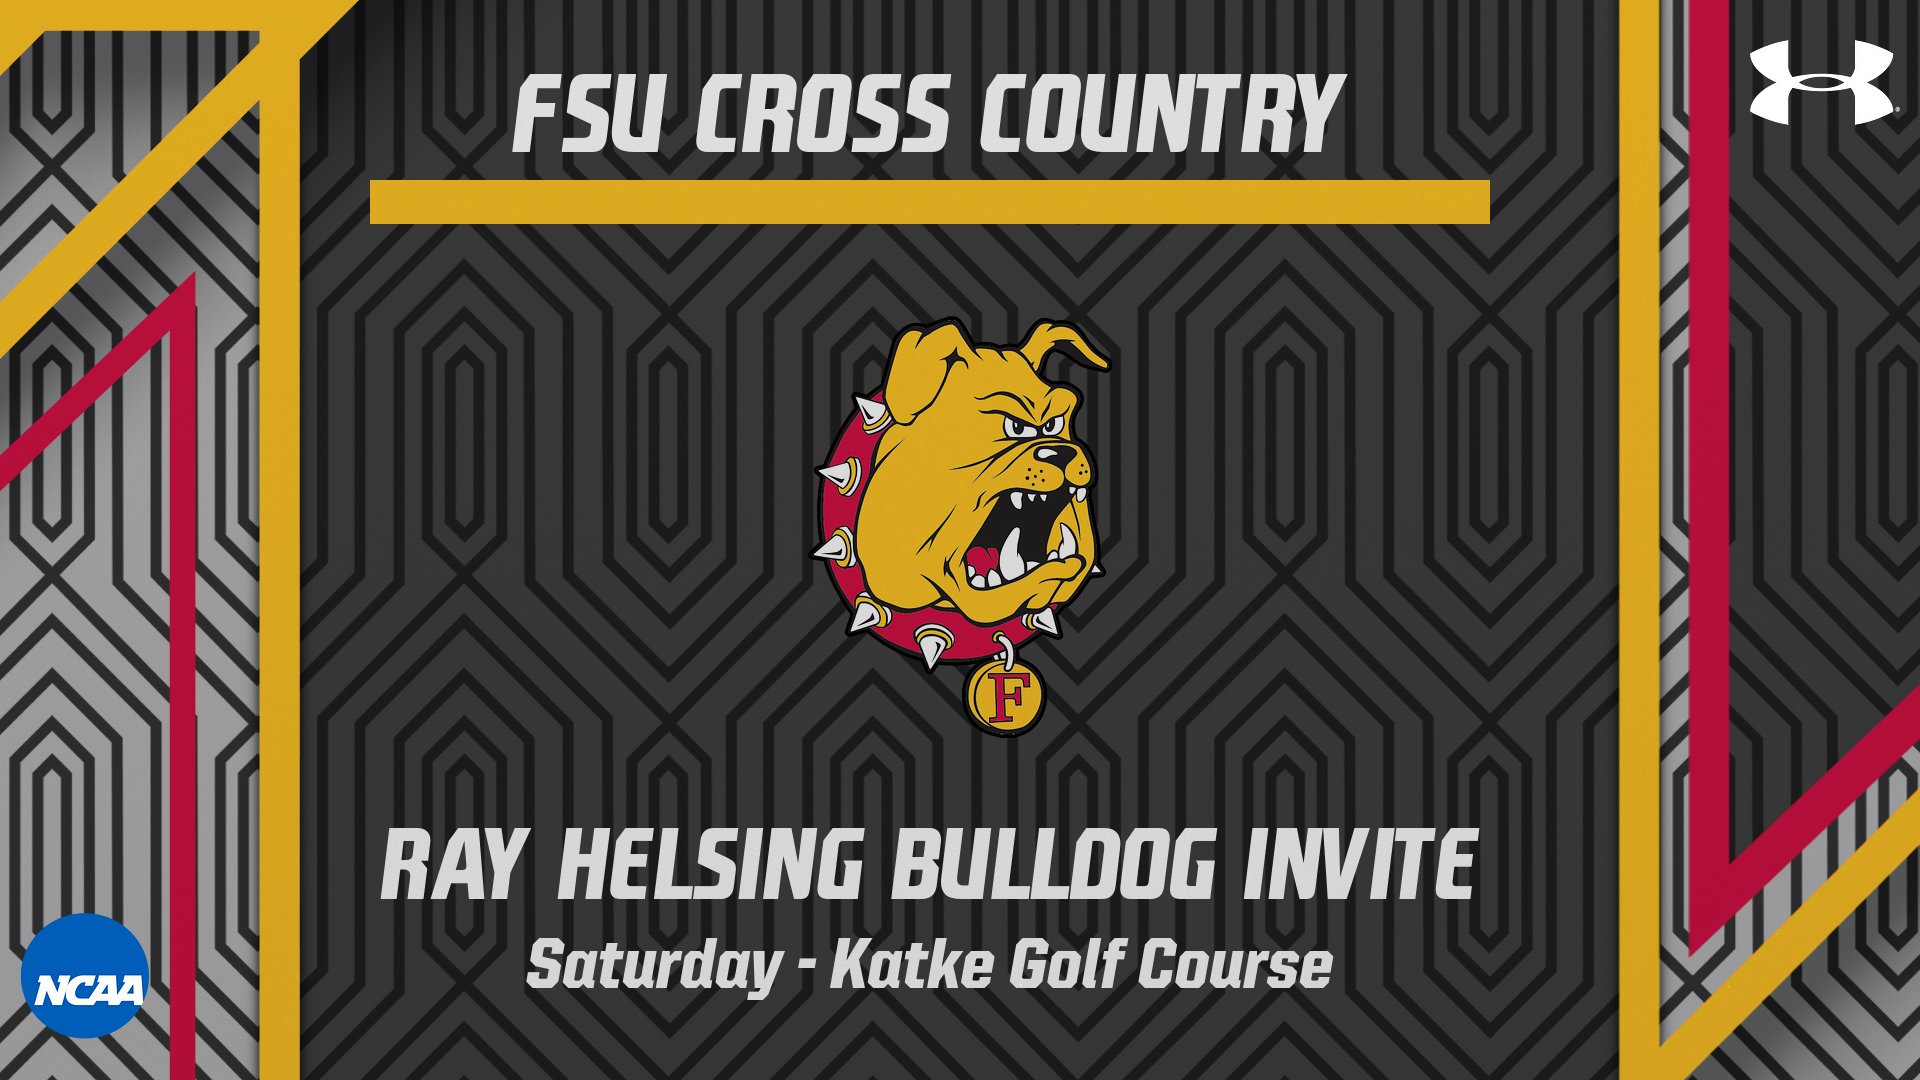 Ferris State Cross Country Squads To Host 48th Annual Ray Helsing Bulldog Invite This Saturday